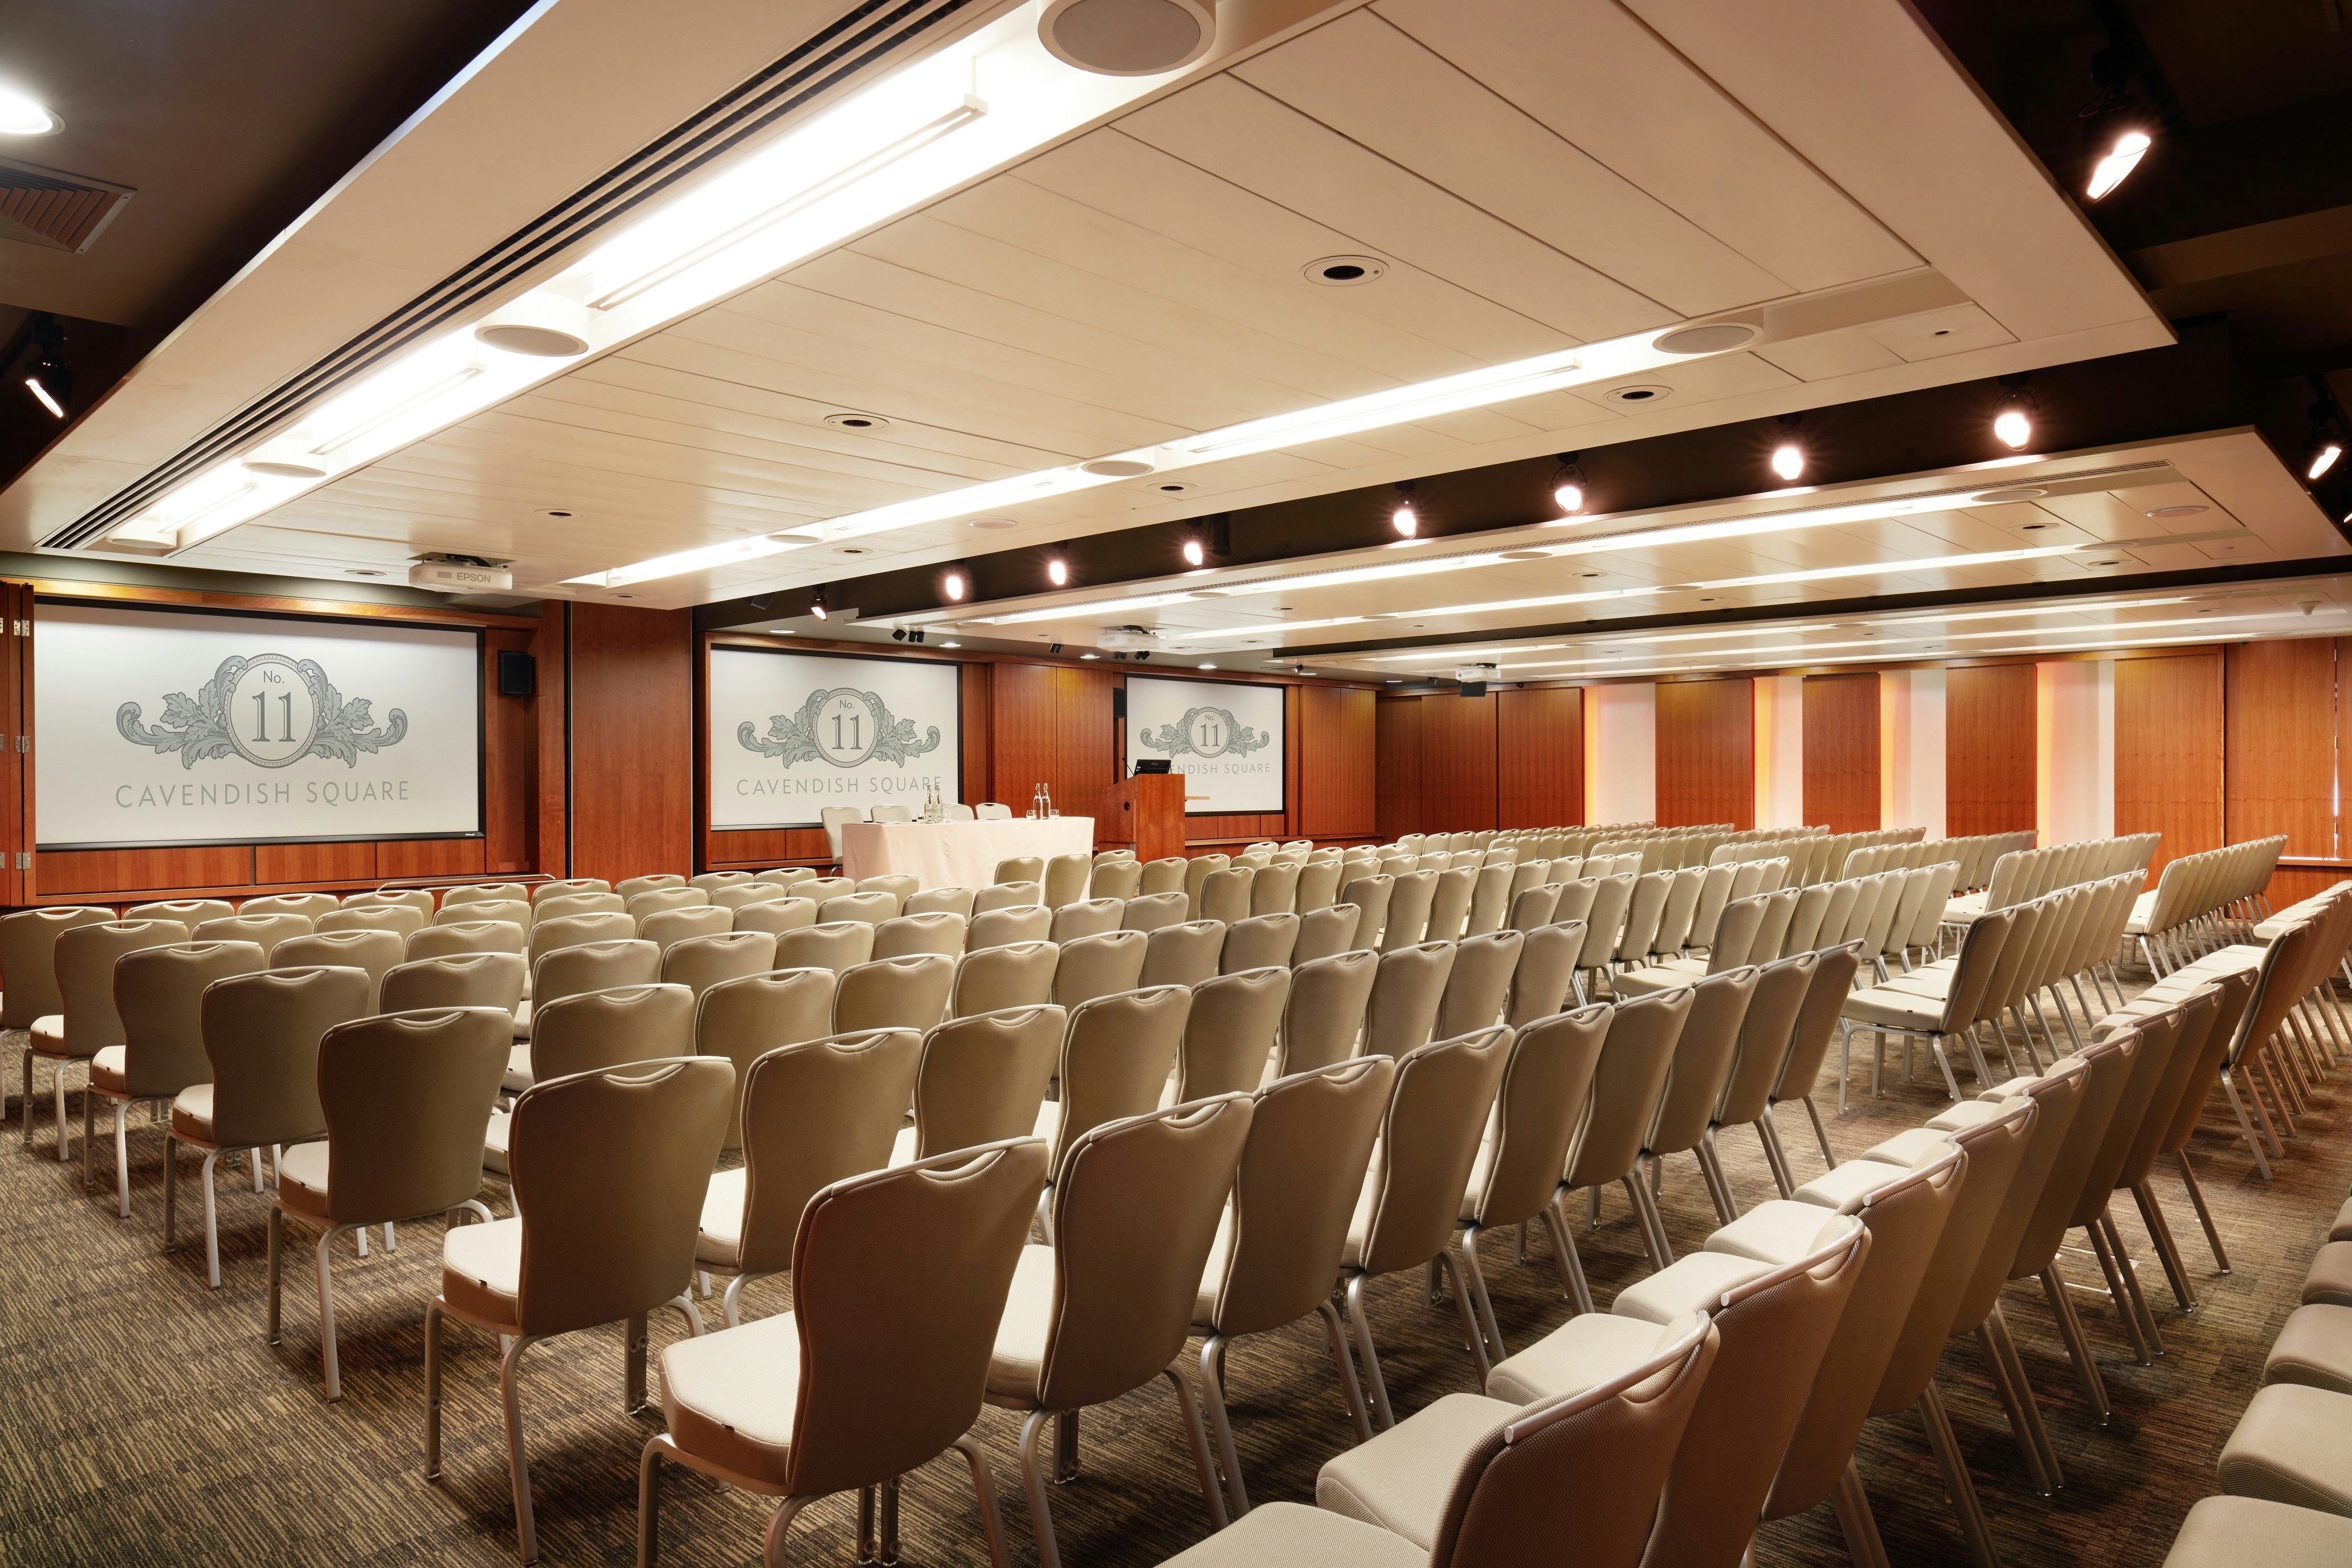 Meeting Rooms Venues in West London - No.11 Cavendish Square